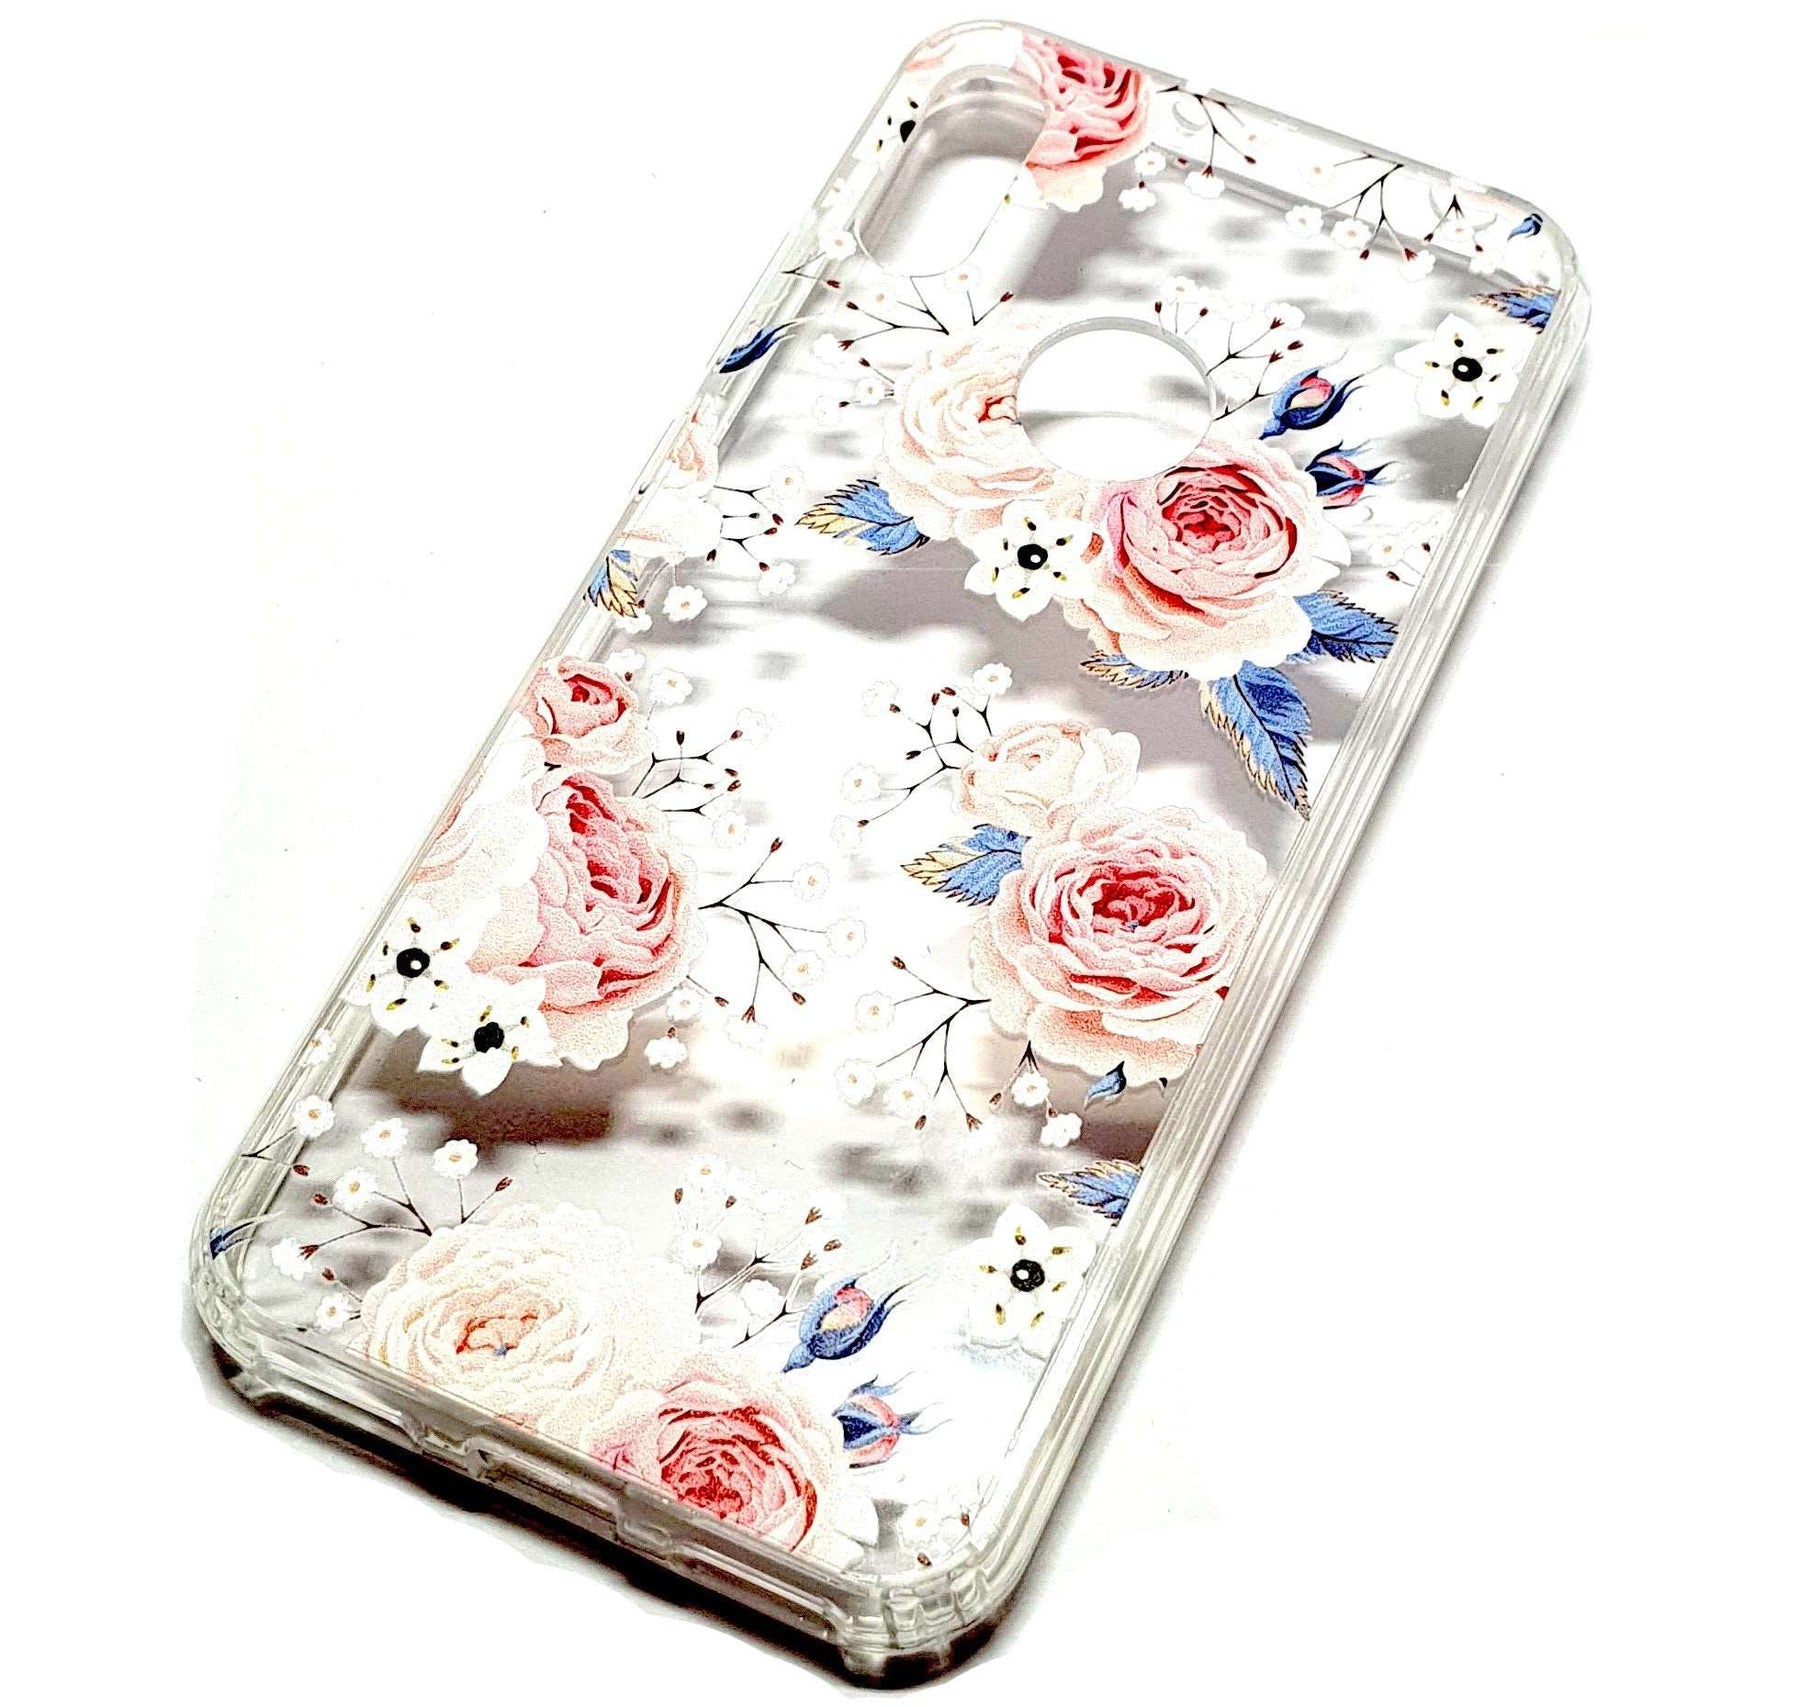 Huawei Y6 2019 decorative clear transparent phone case roses